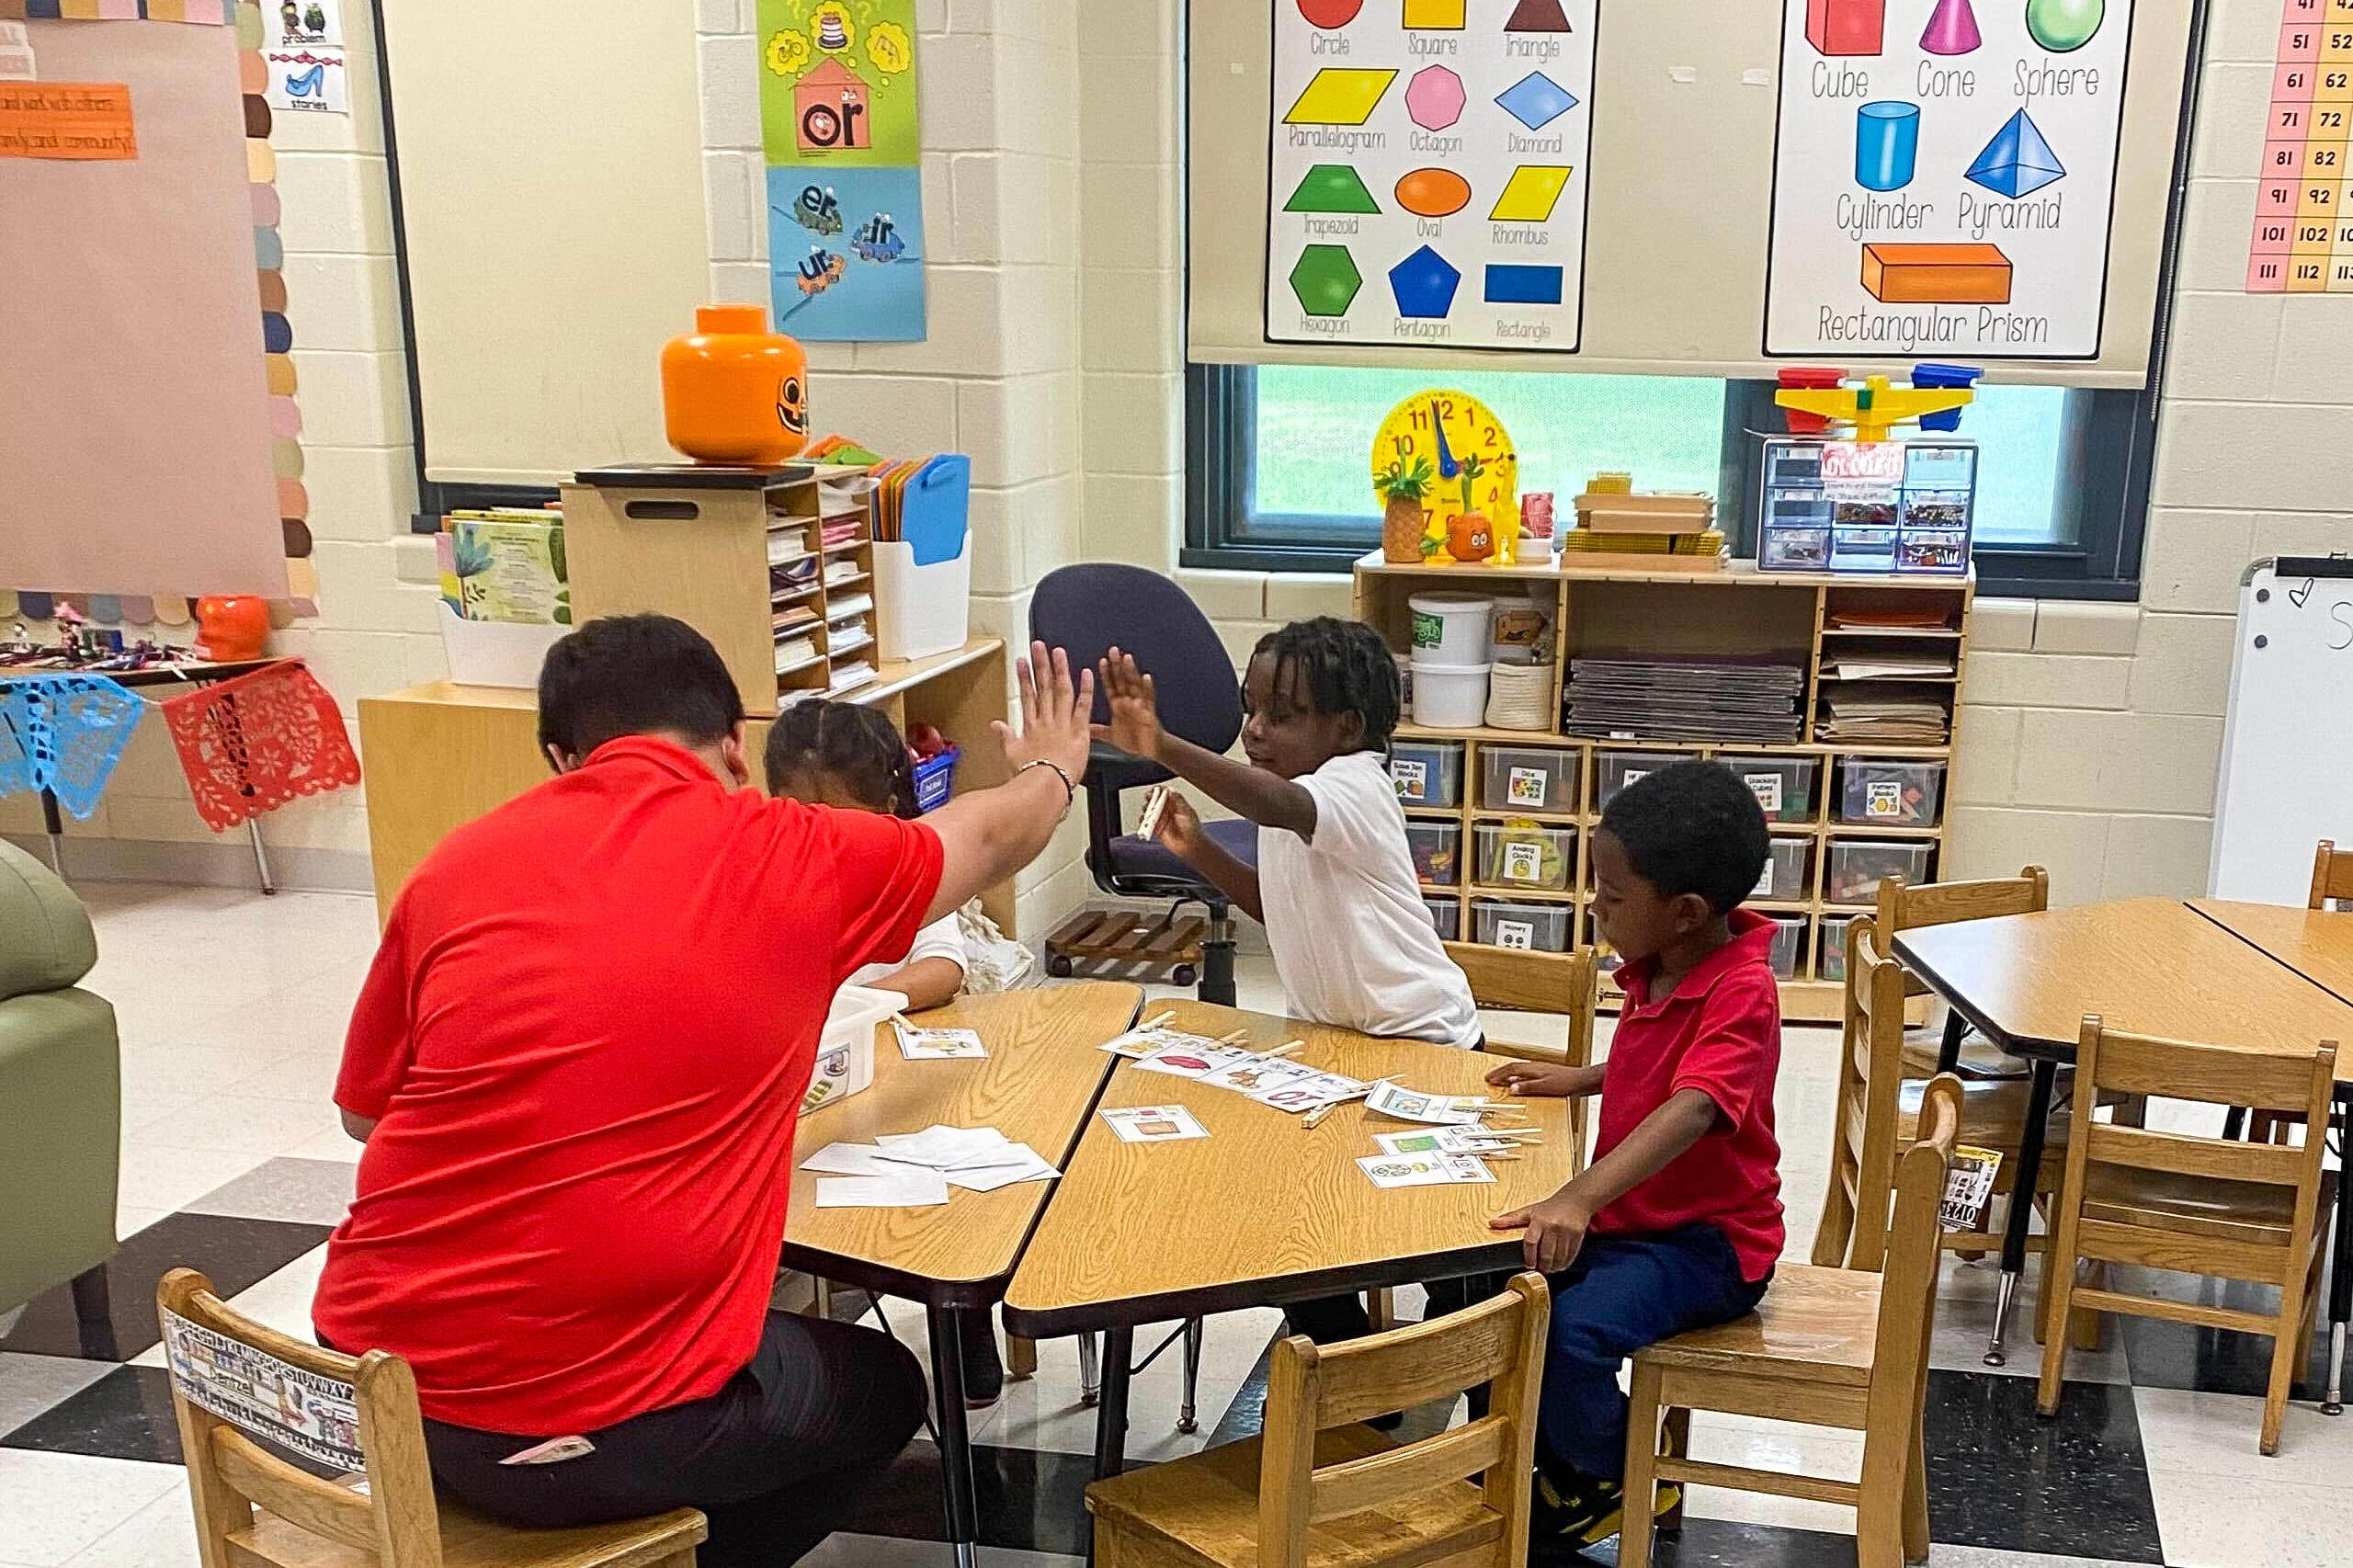 Three children sit around a table to work on an assignment in a colorful classroom. The educator, who is wearing a red shirt, gives a high five to a young student who is wearing a white collared shirt. 